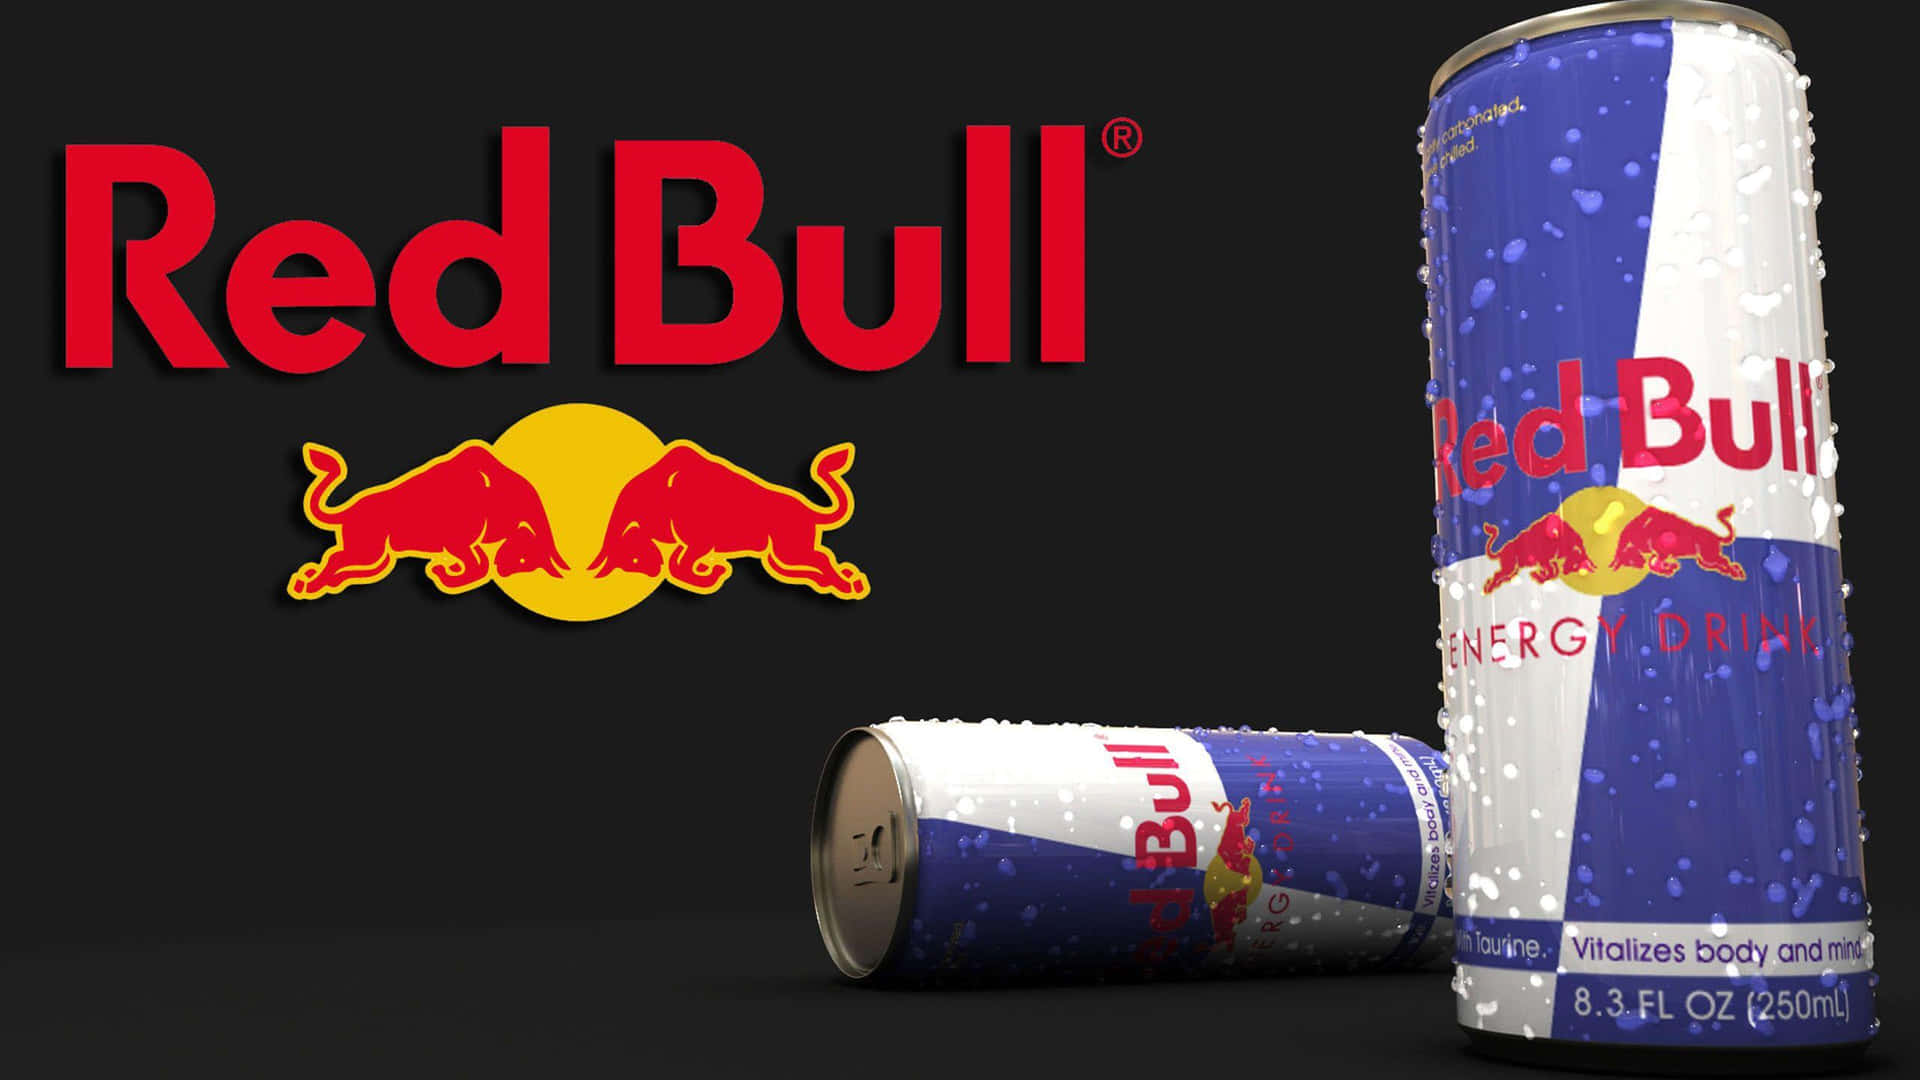 ENERGIZE YOUR DAY WITH RED BULL